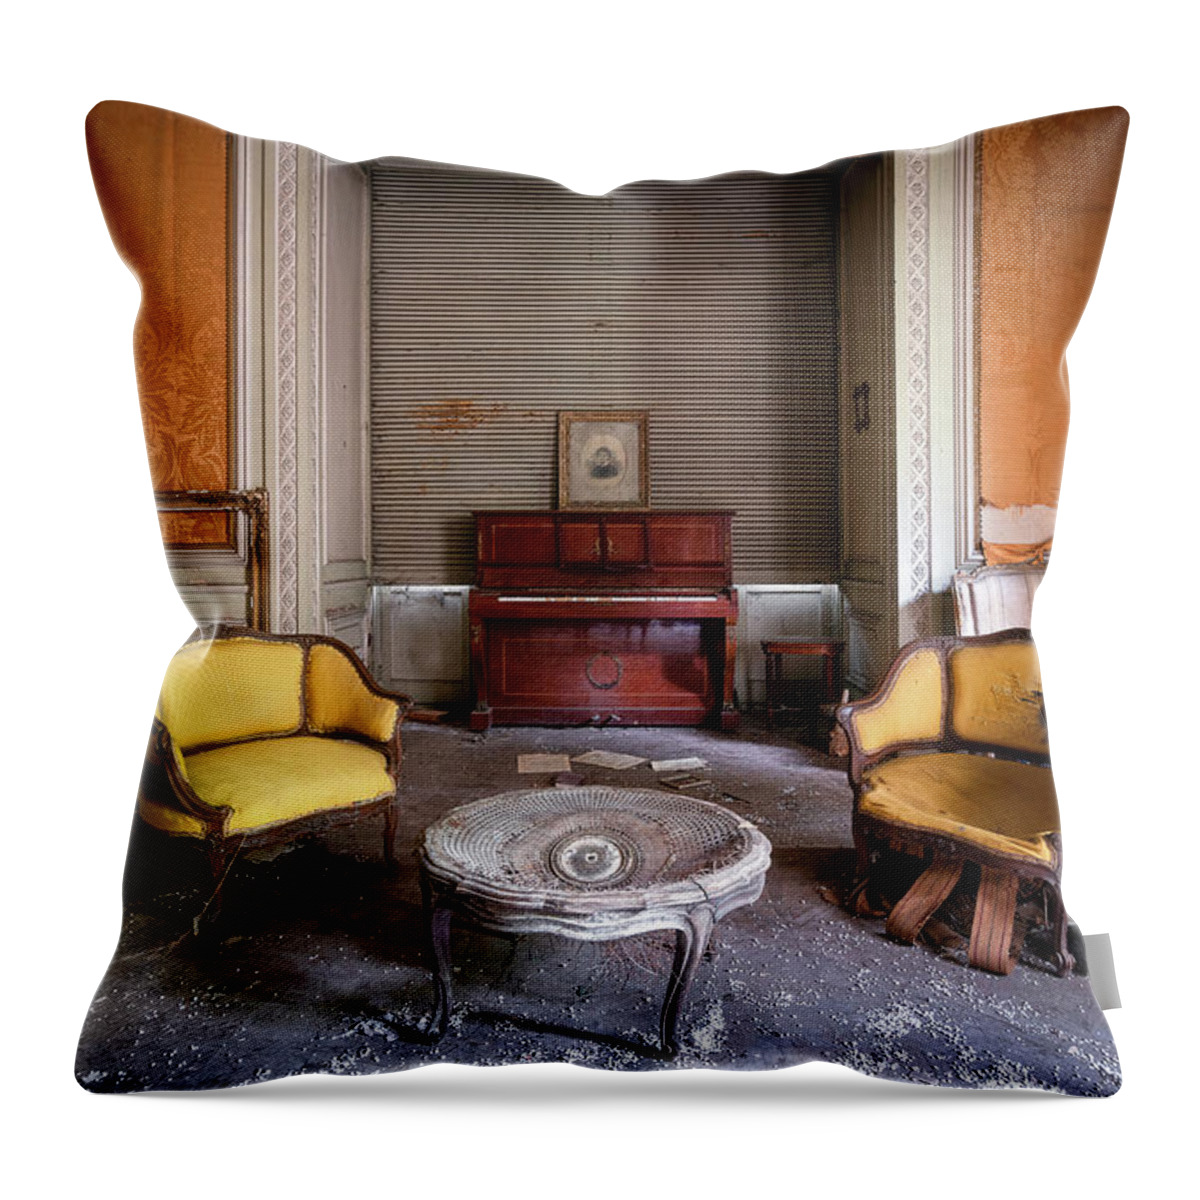 Urban Throw Pillow featuring the photograph Living Room in Decay with Piano by Roman Robroek